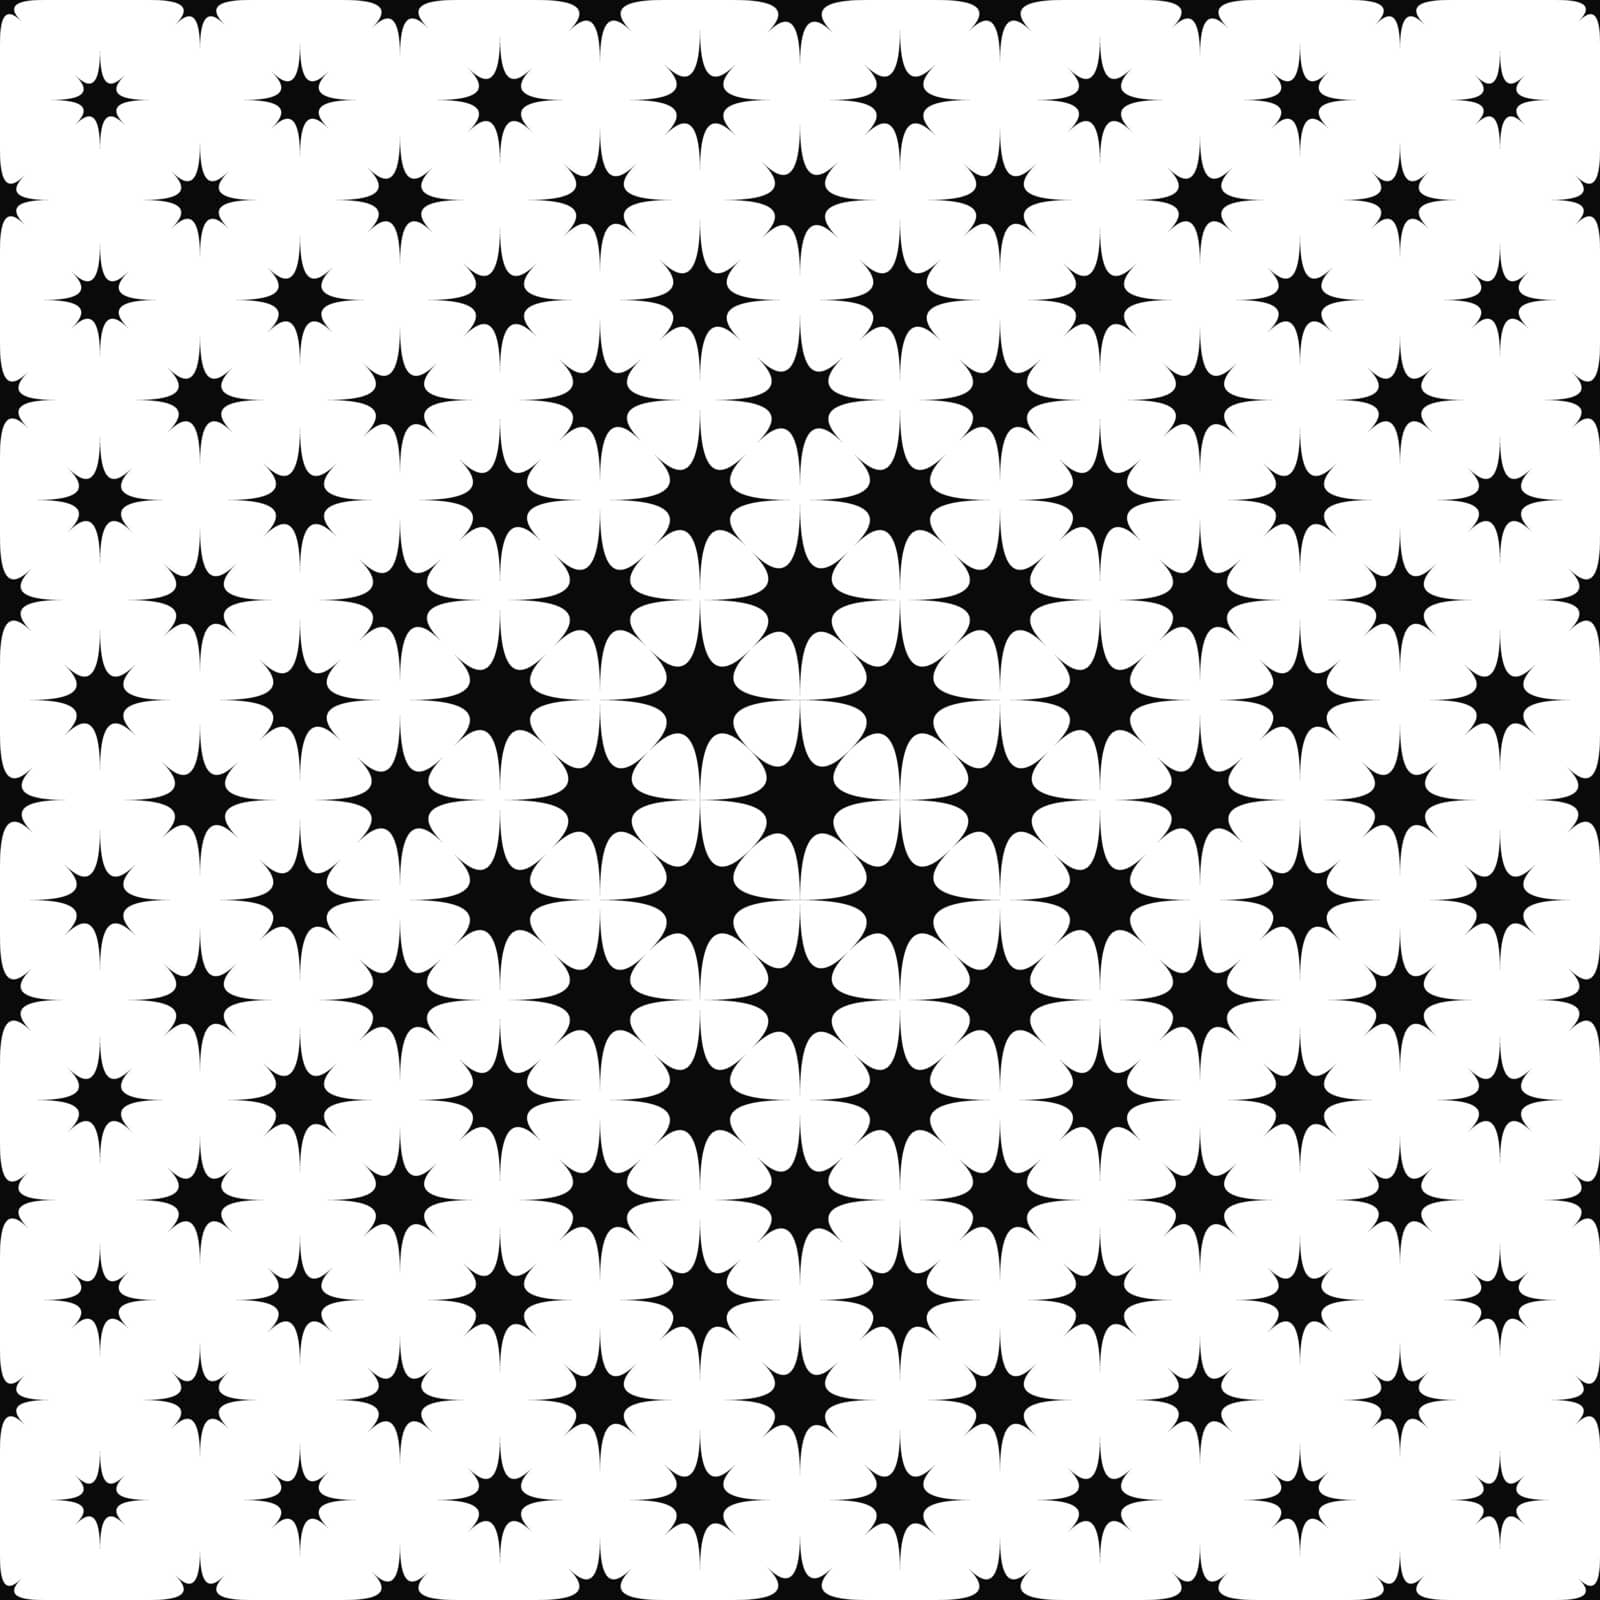 Monochrome repeating curved star pattern by davidzydd